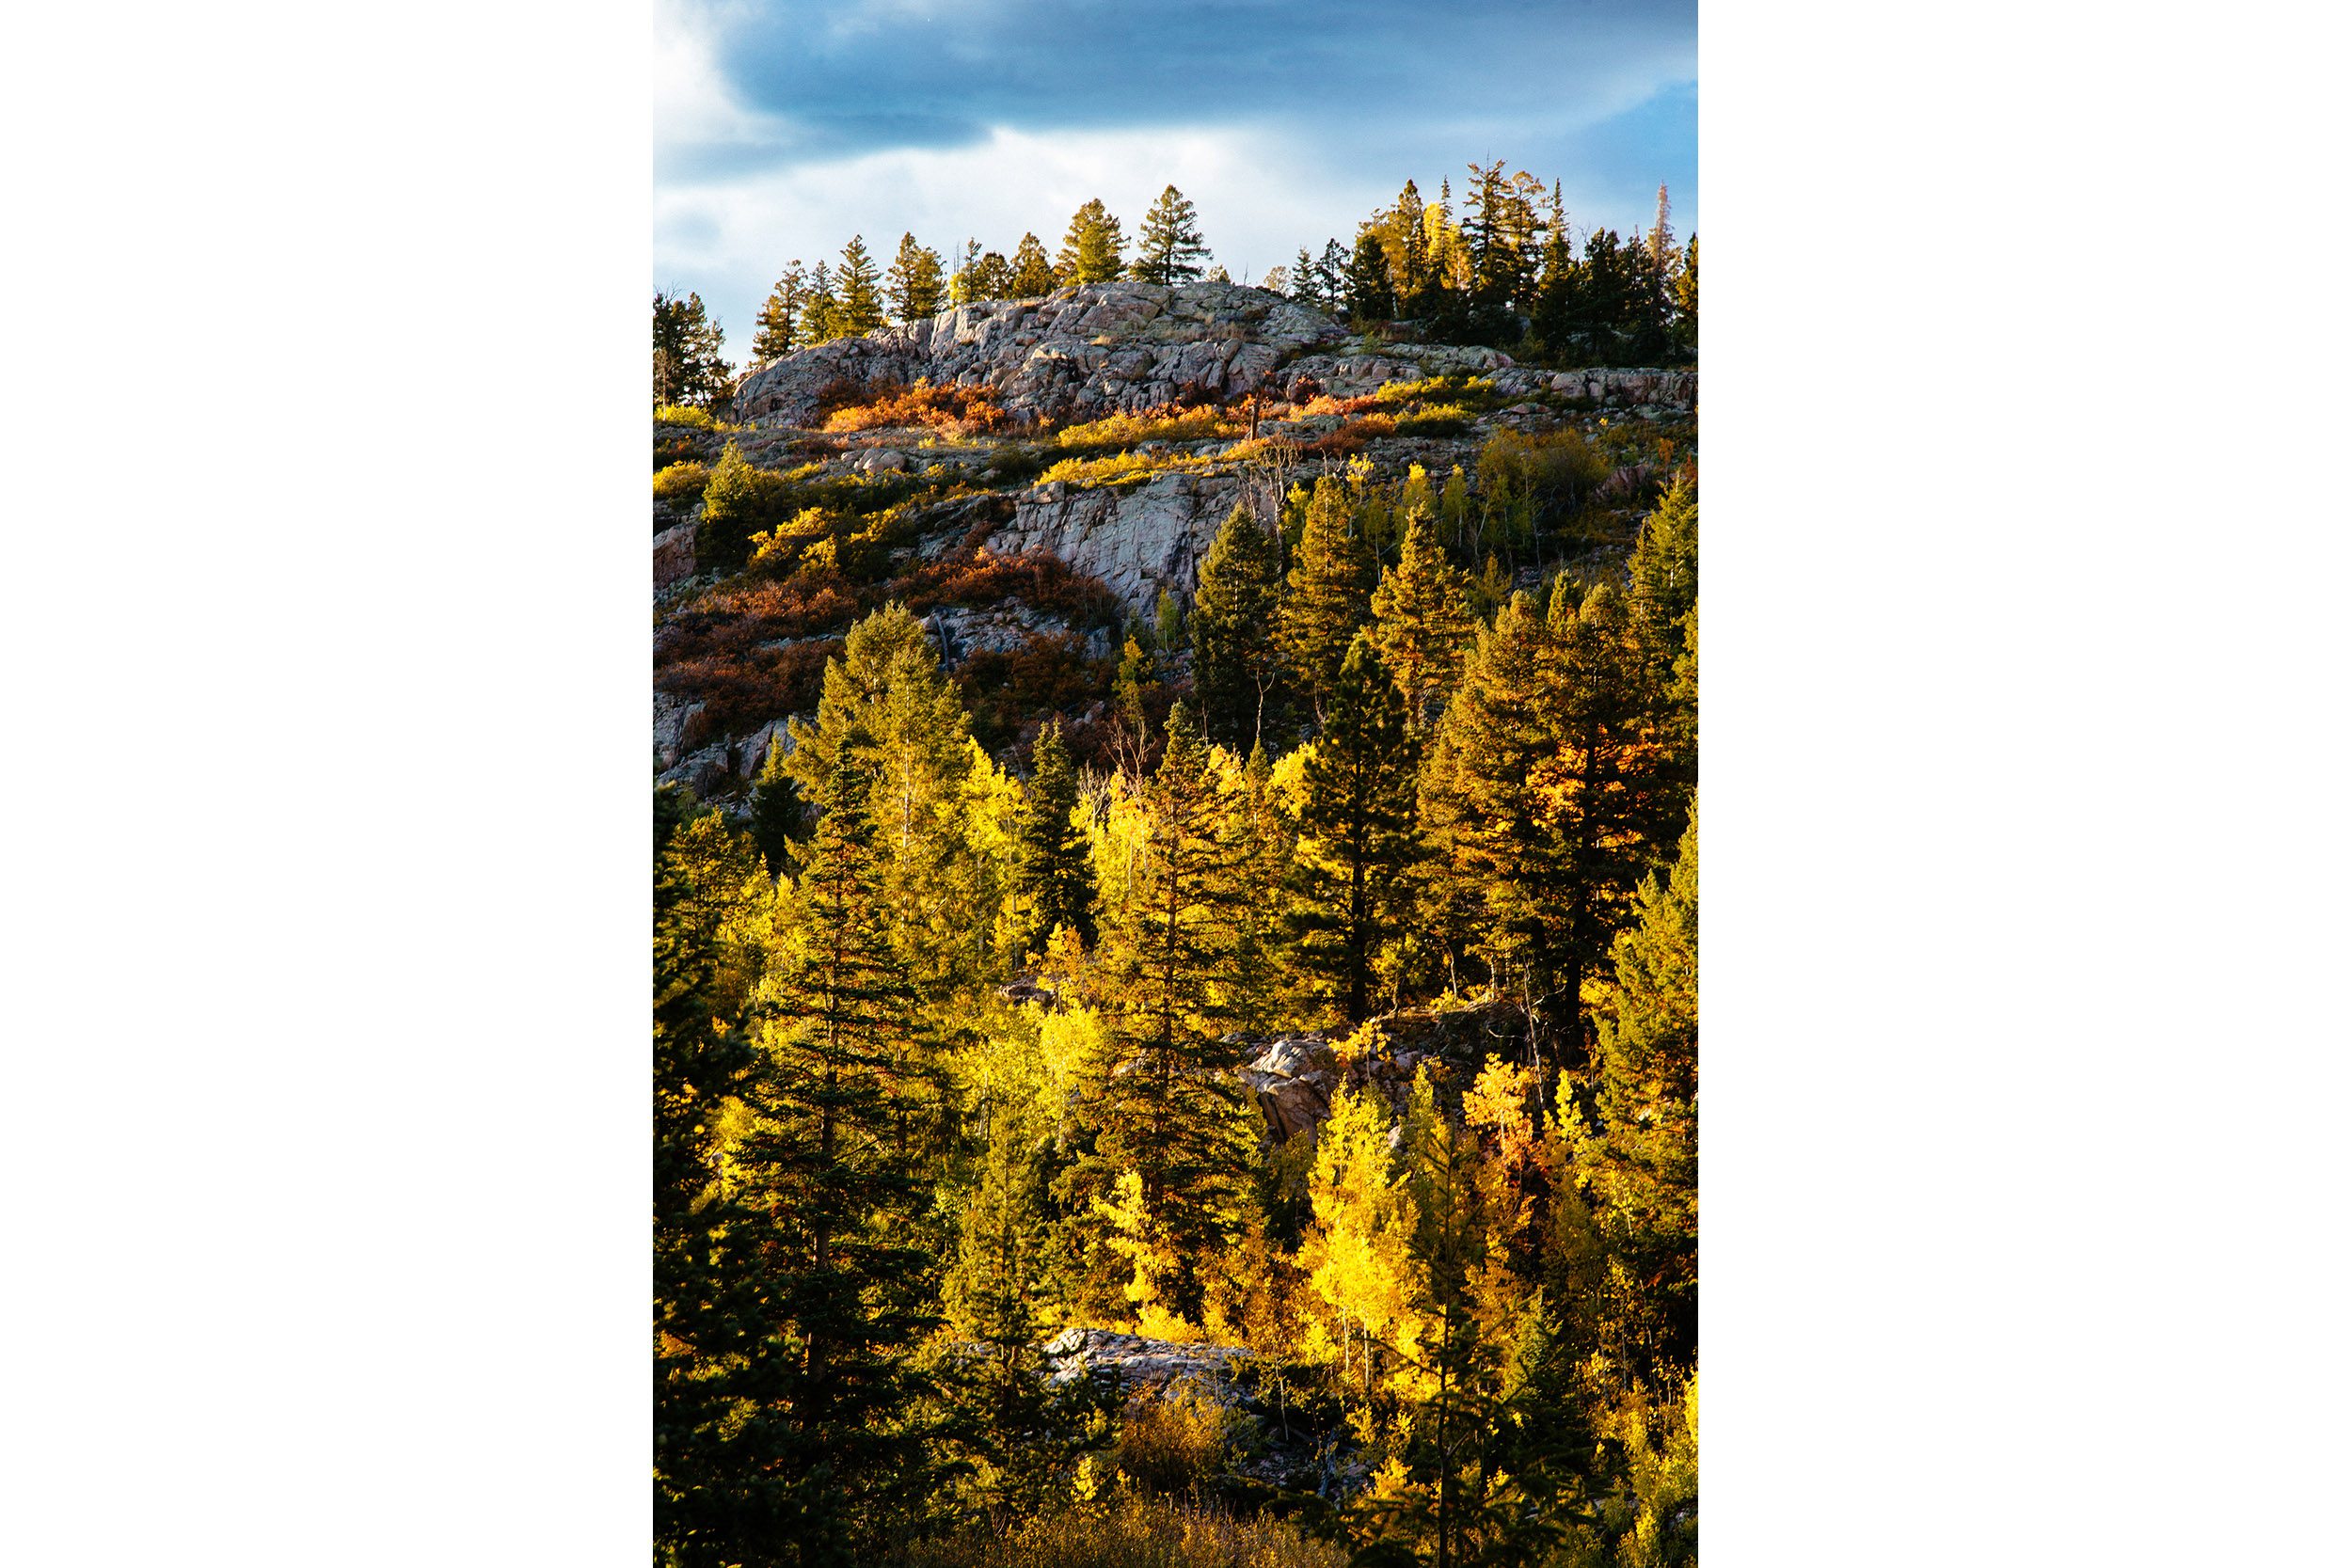 High rock formations give way to fall foliage in the Rocky Mountains